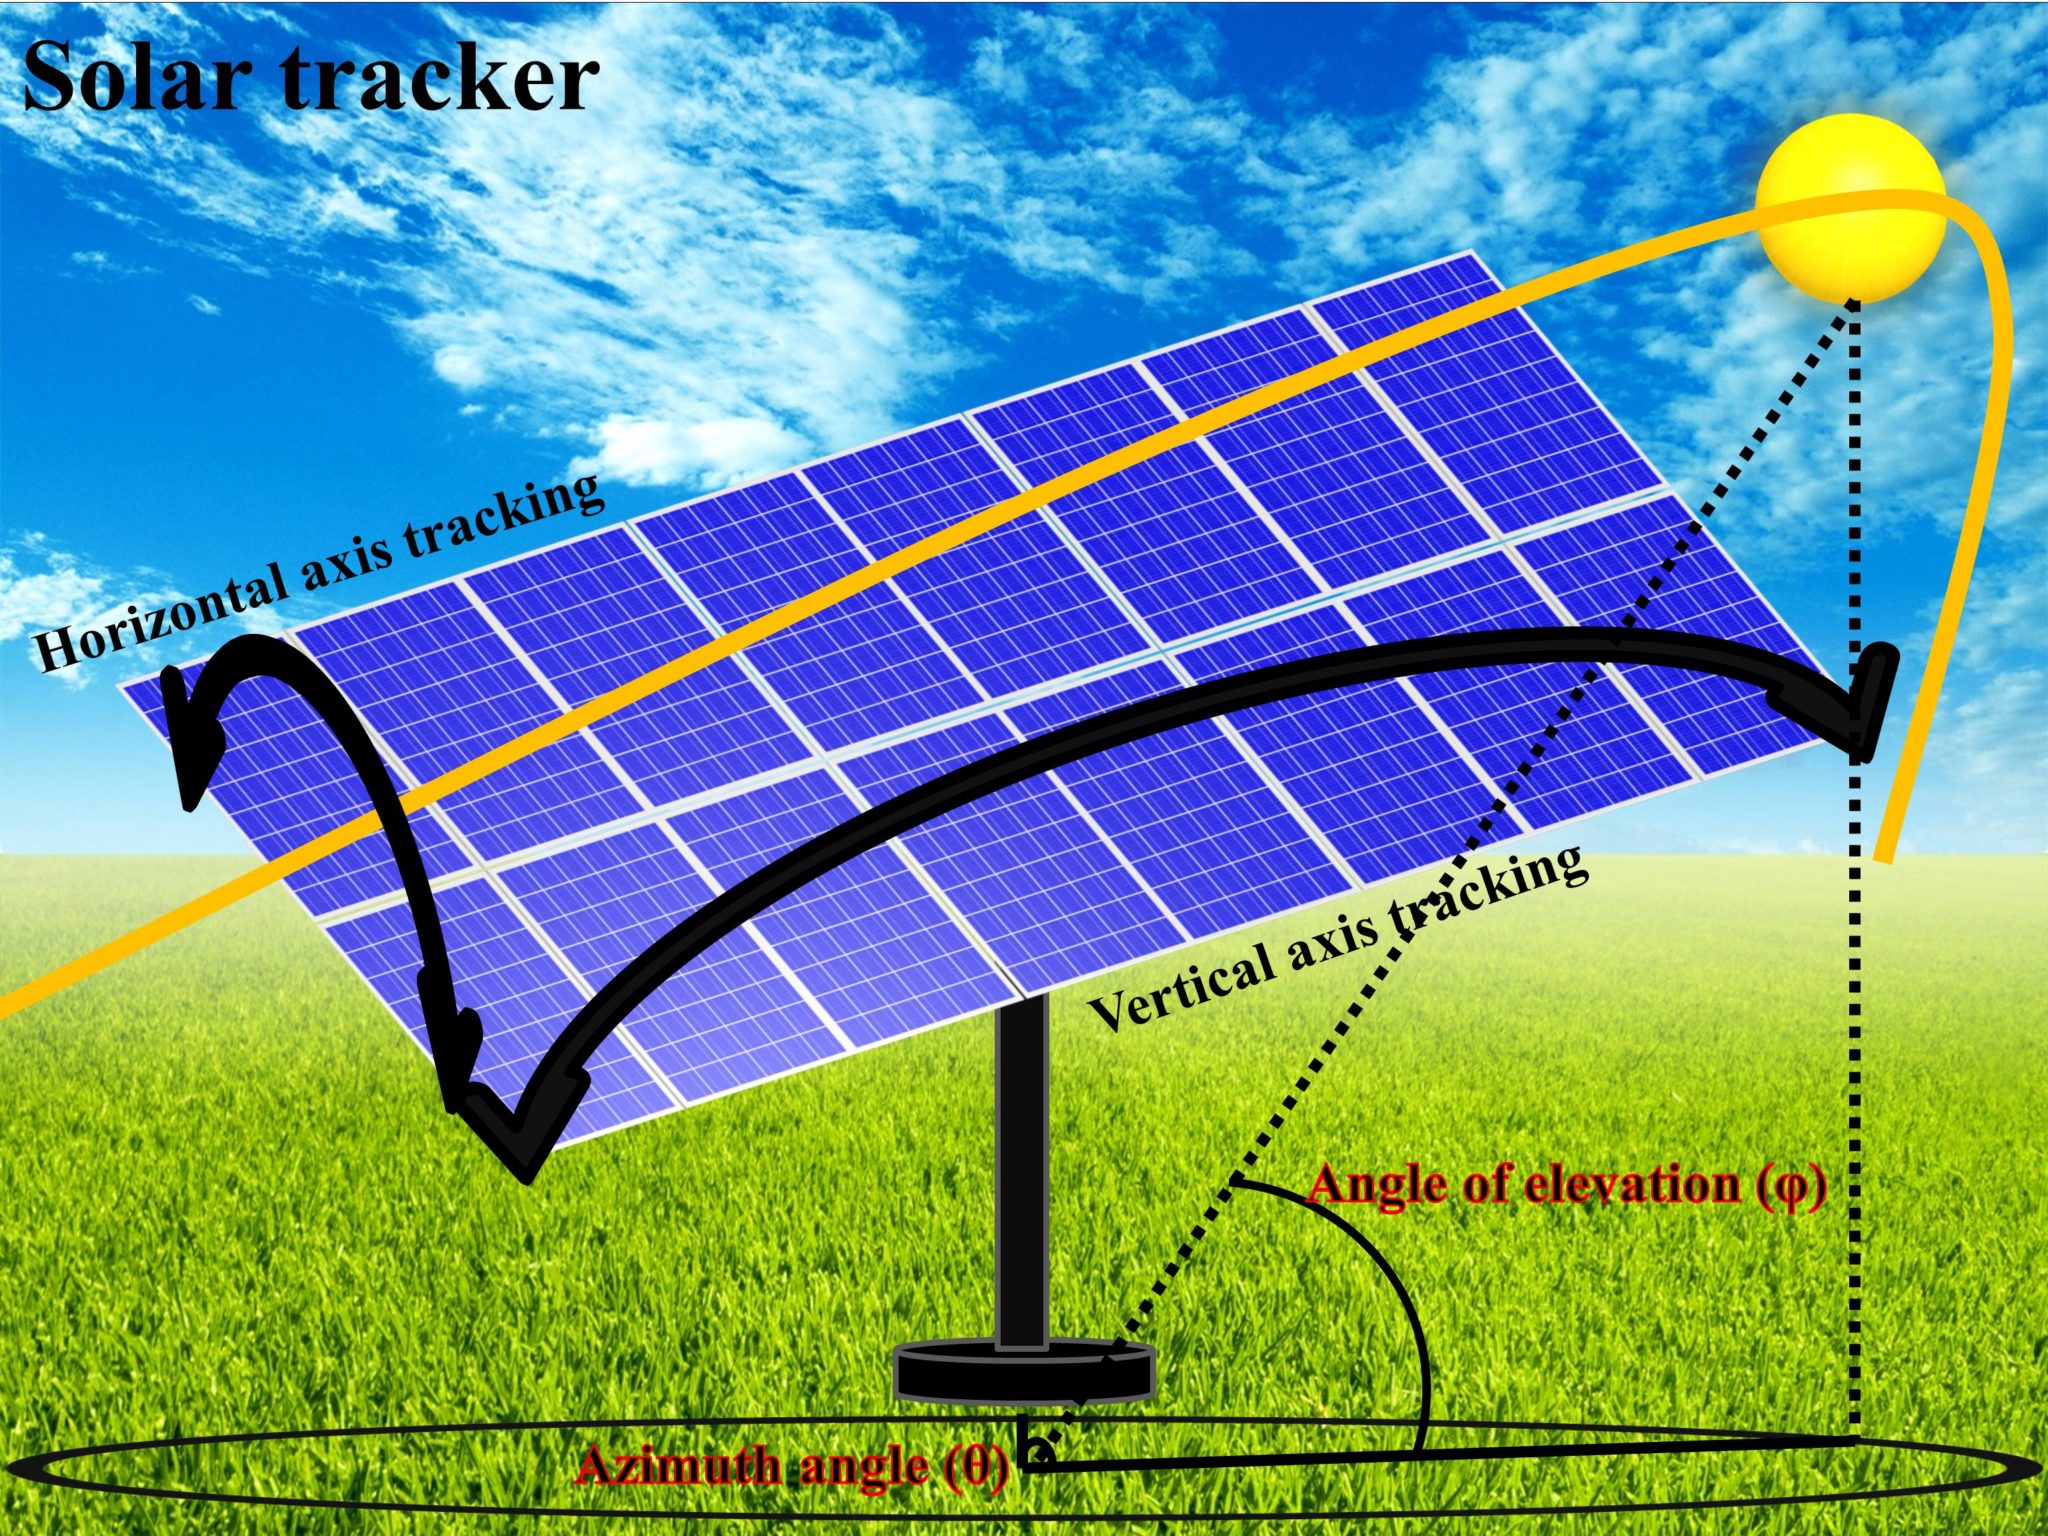 Solar tracker to increase the efficiency of solar energy systems